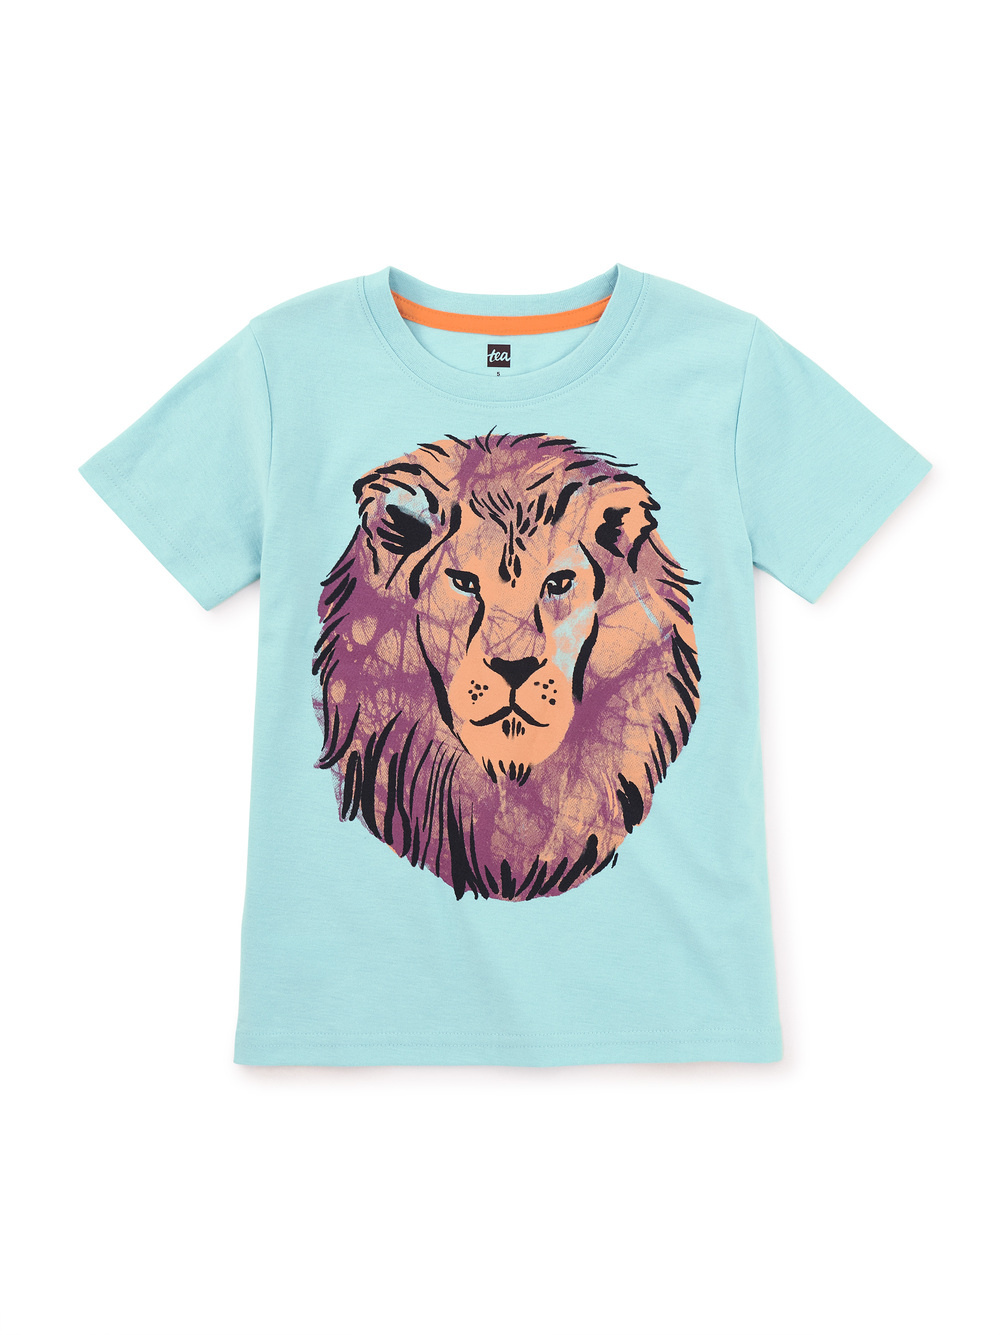 Tea Collection Lion Graphic Tee Canal Blue